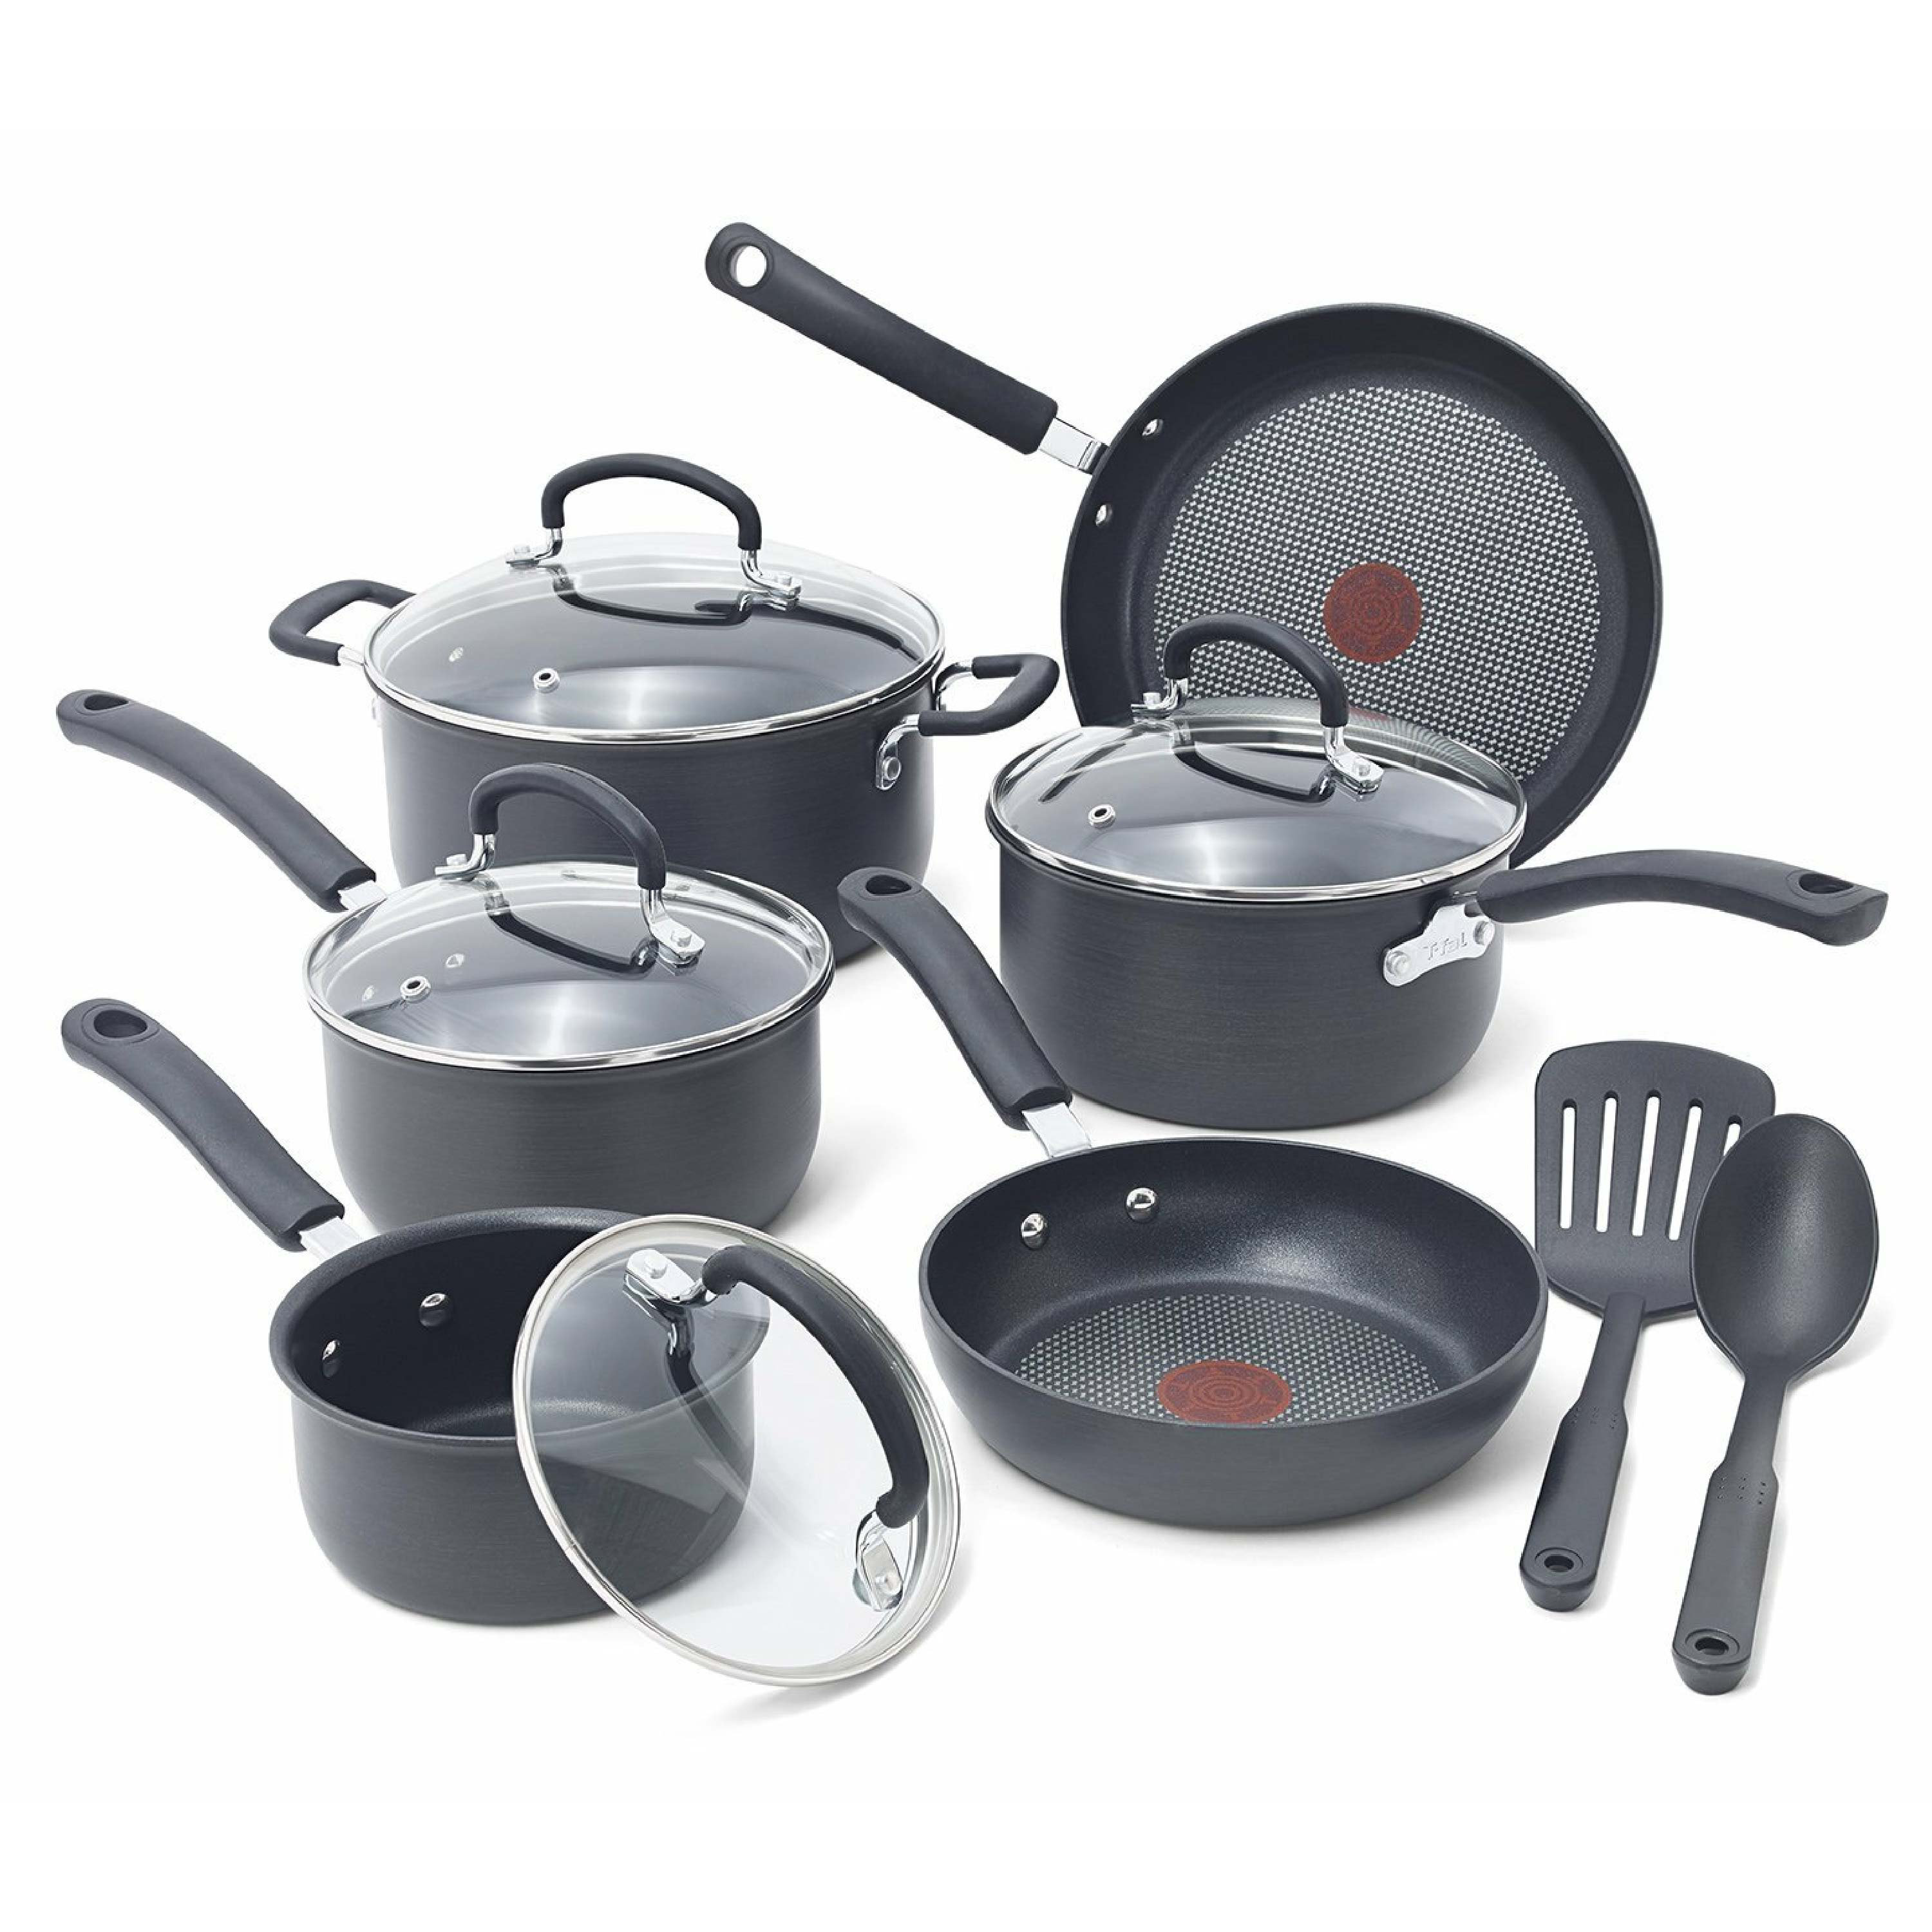 T-fal Ultimate Hard Anodized Nonstick 2 Piece Fry Pan Set 8, 10